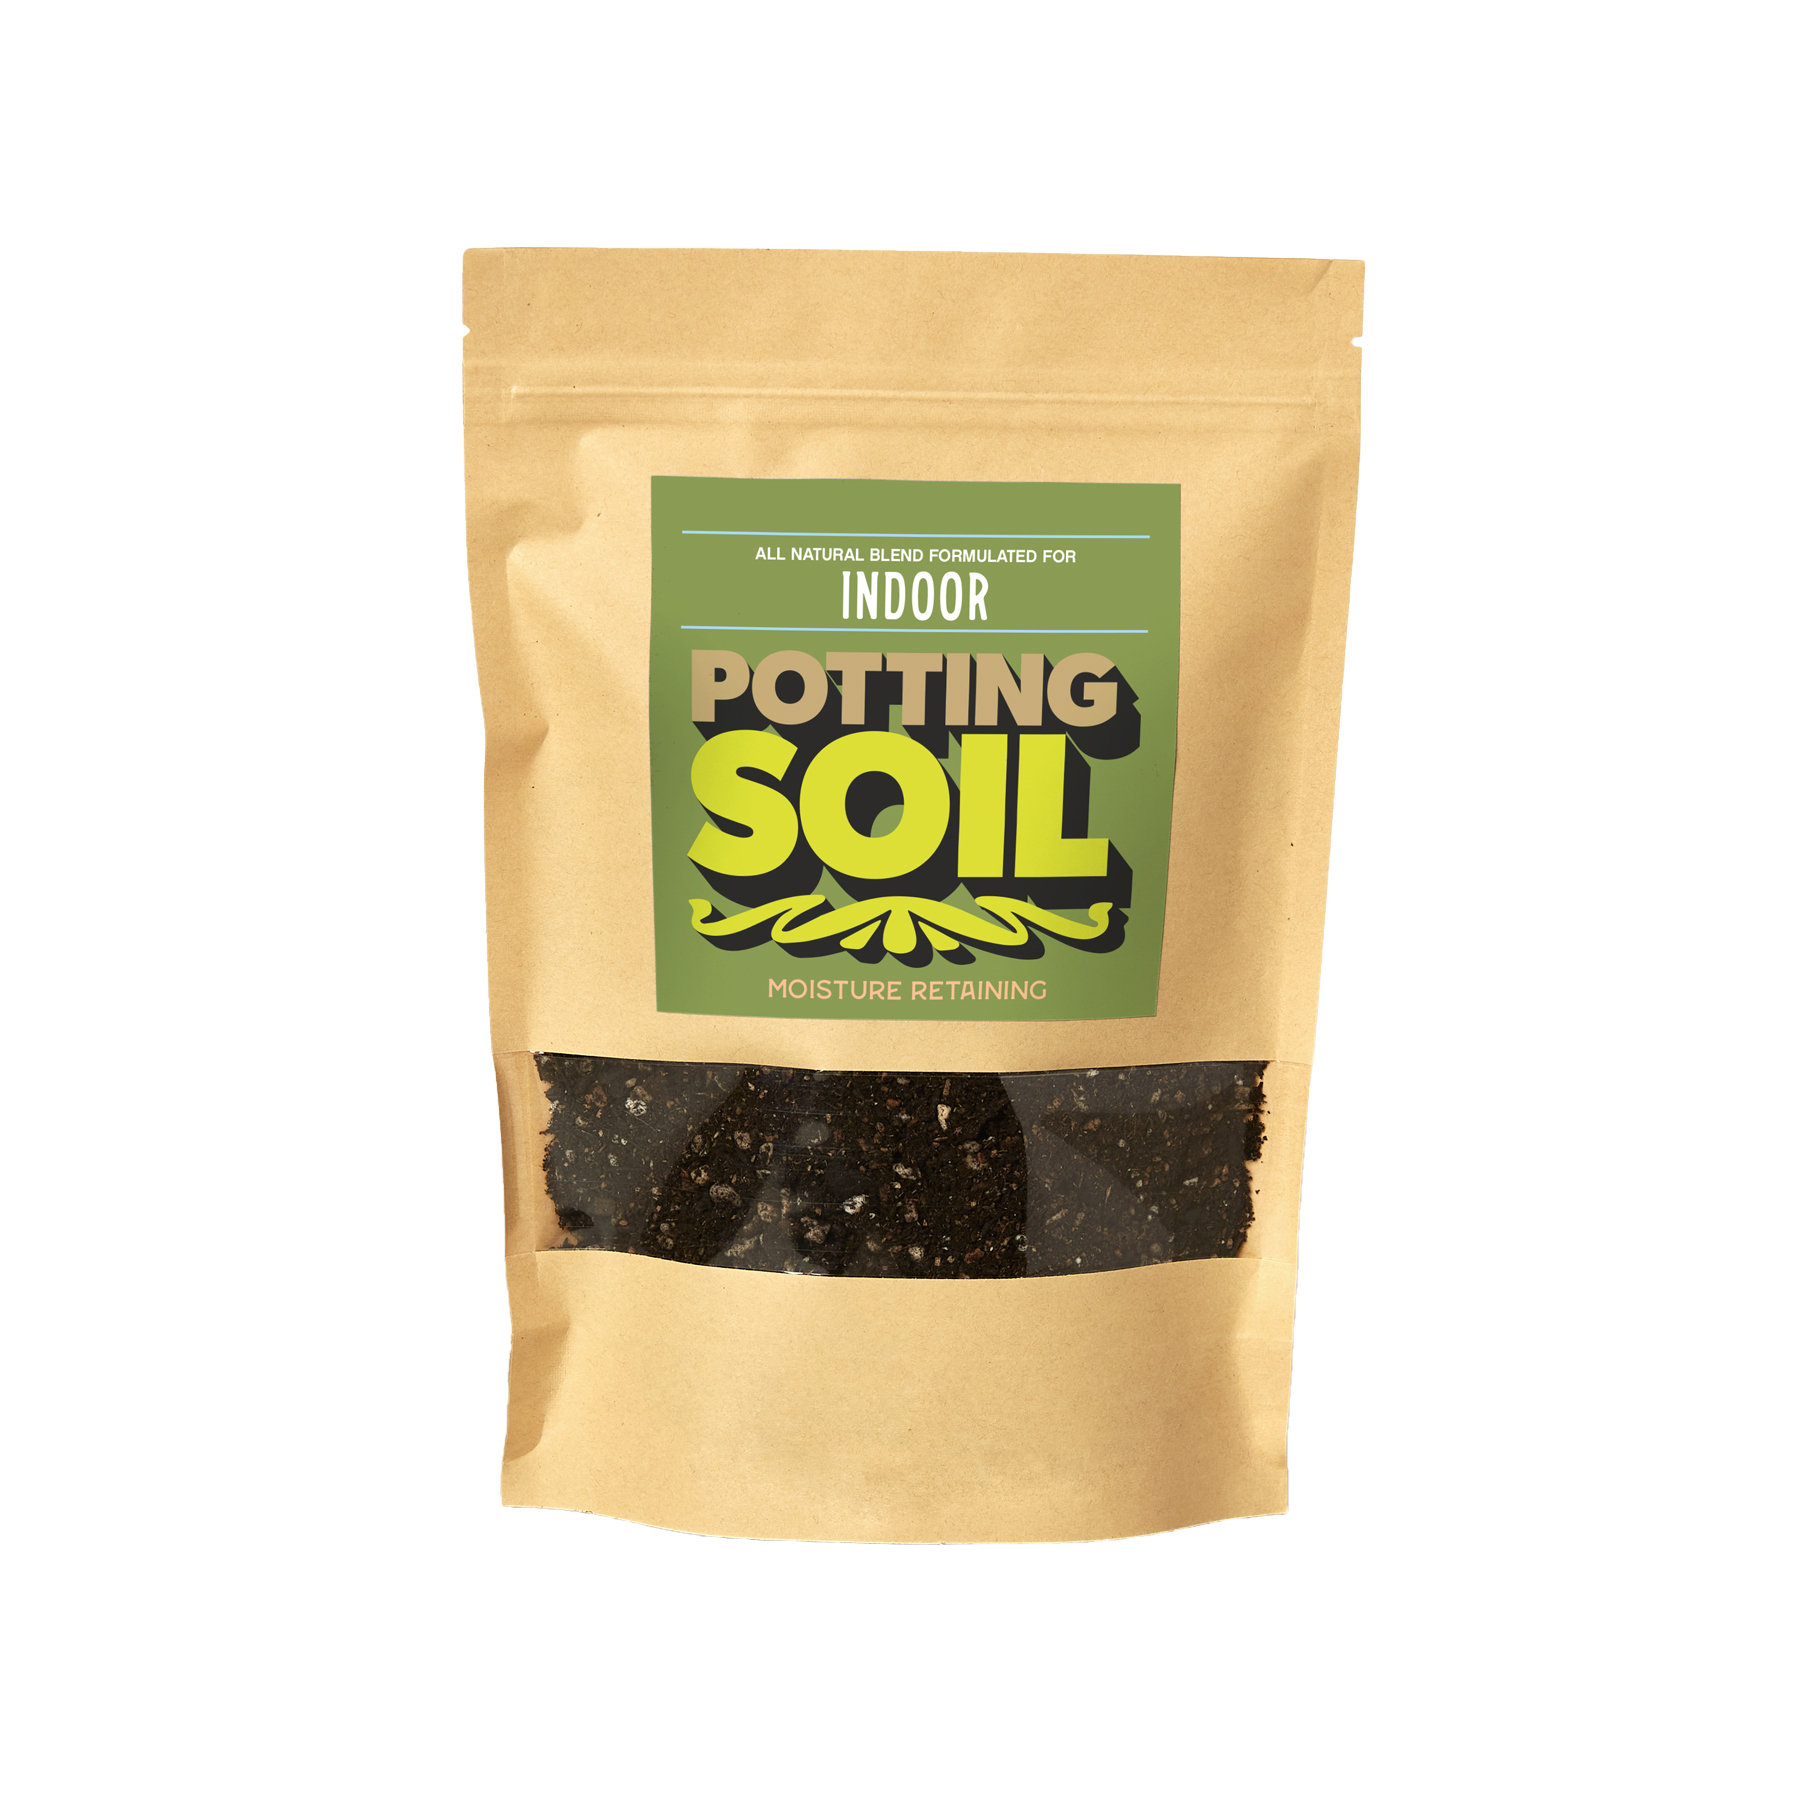 A bag of potting soil on a white background, available at the best garden nursery near me.